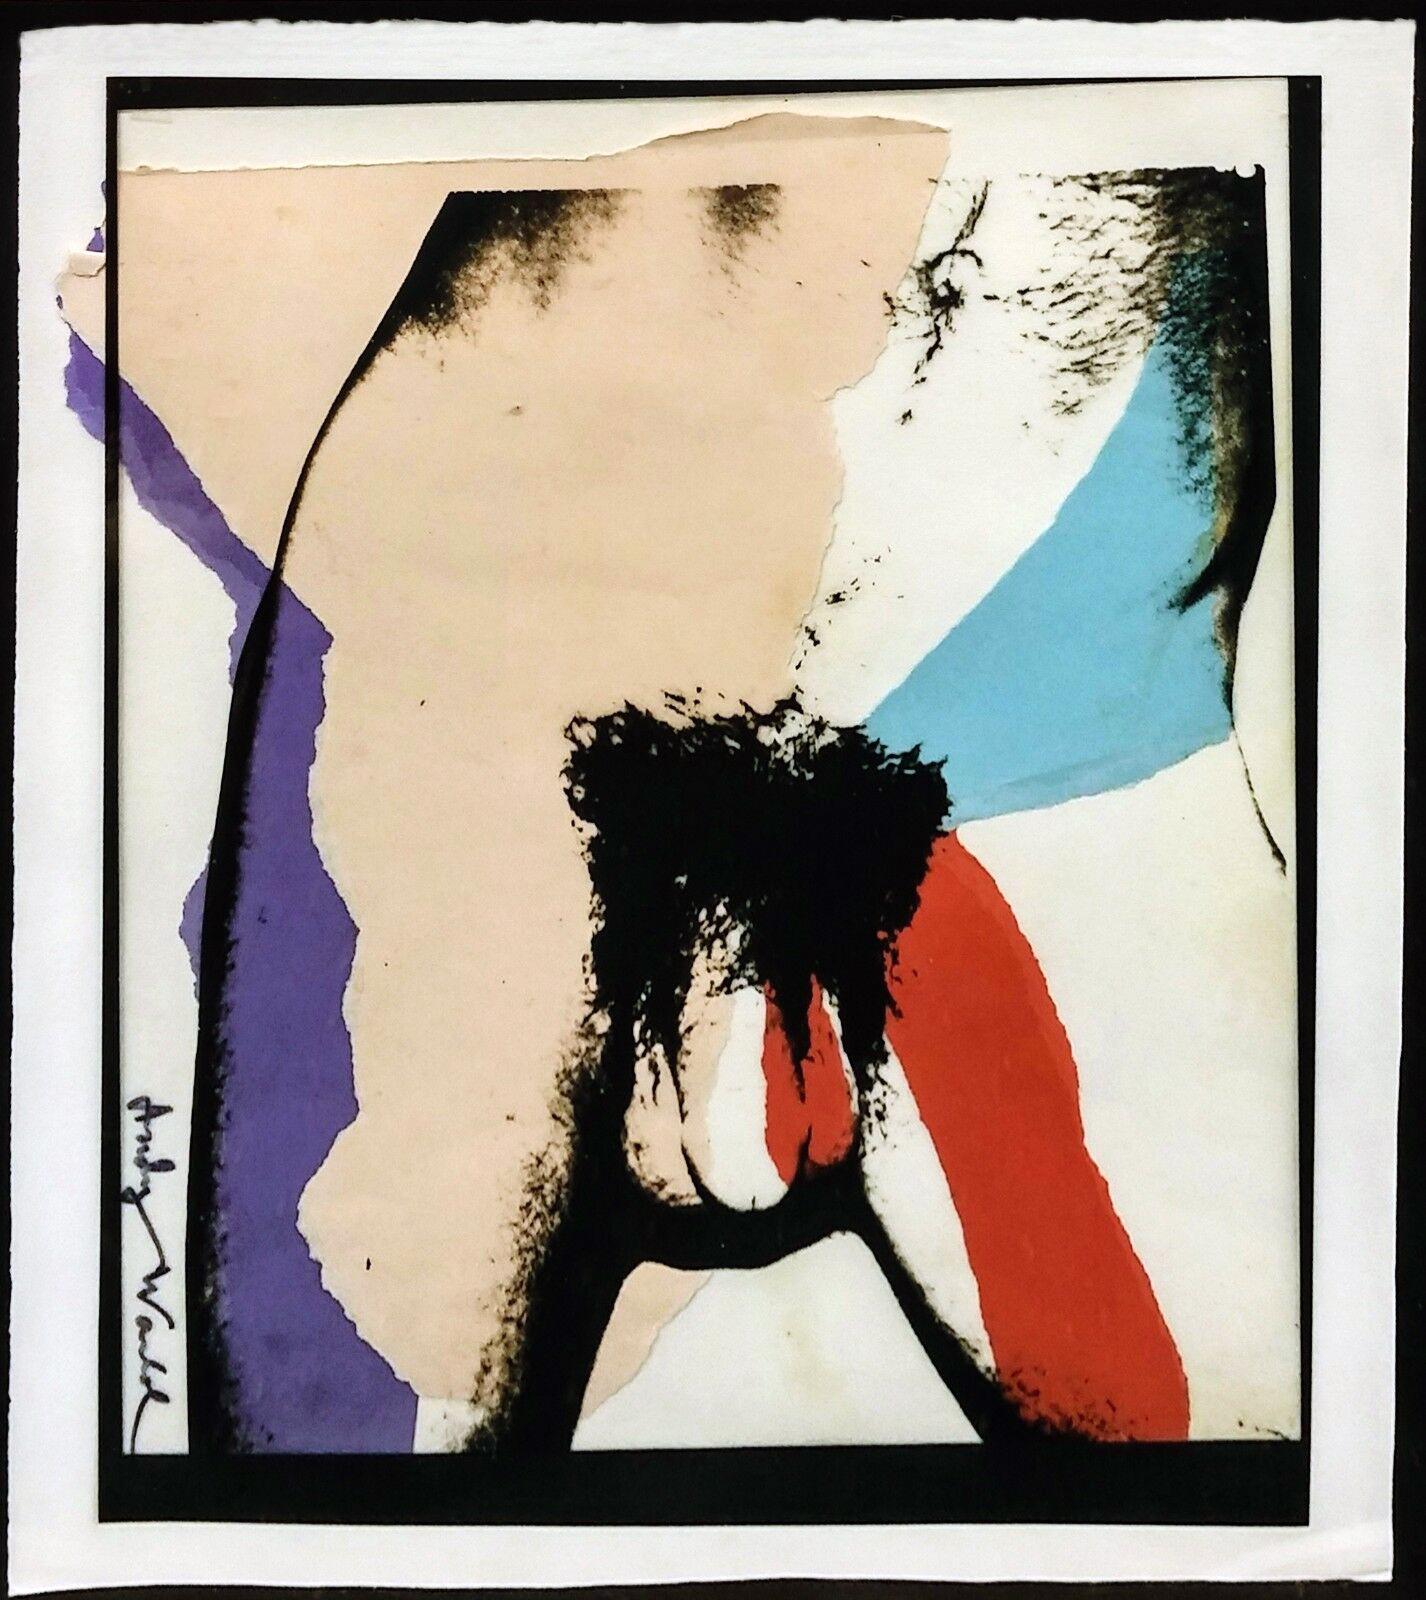 UNTITLED (TORSO) - Photograph by Andy Warhol